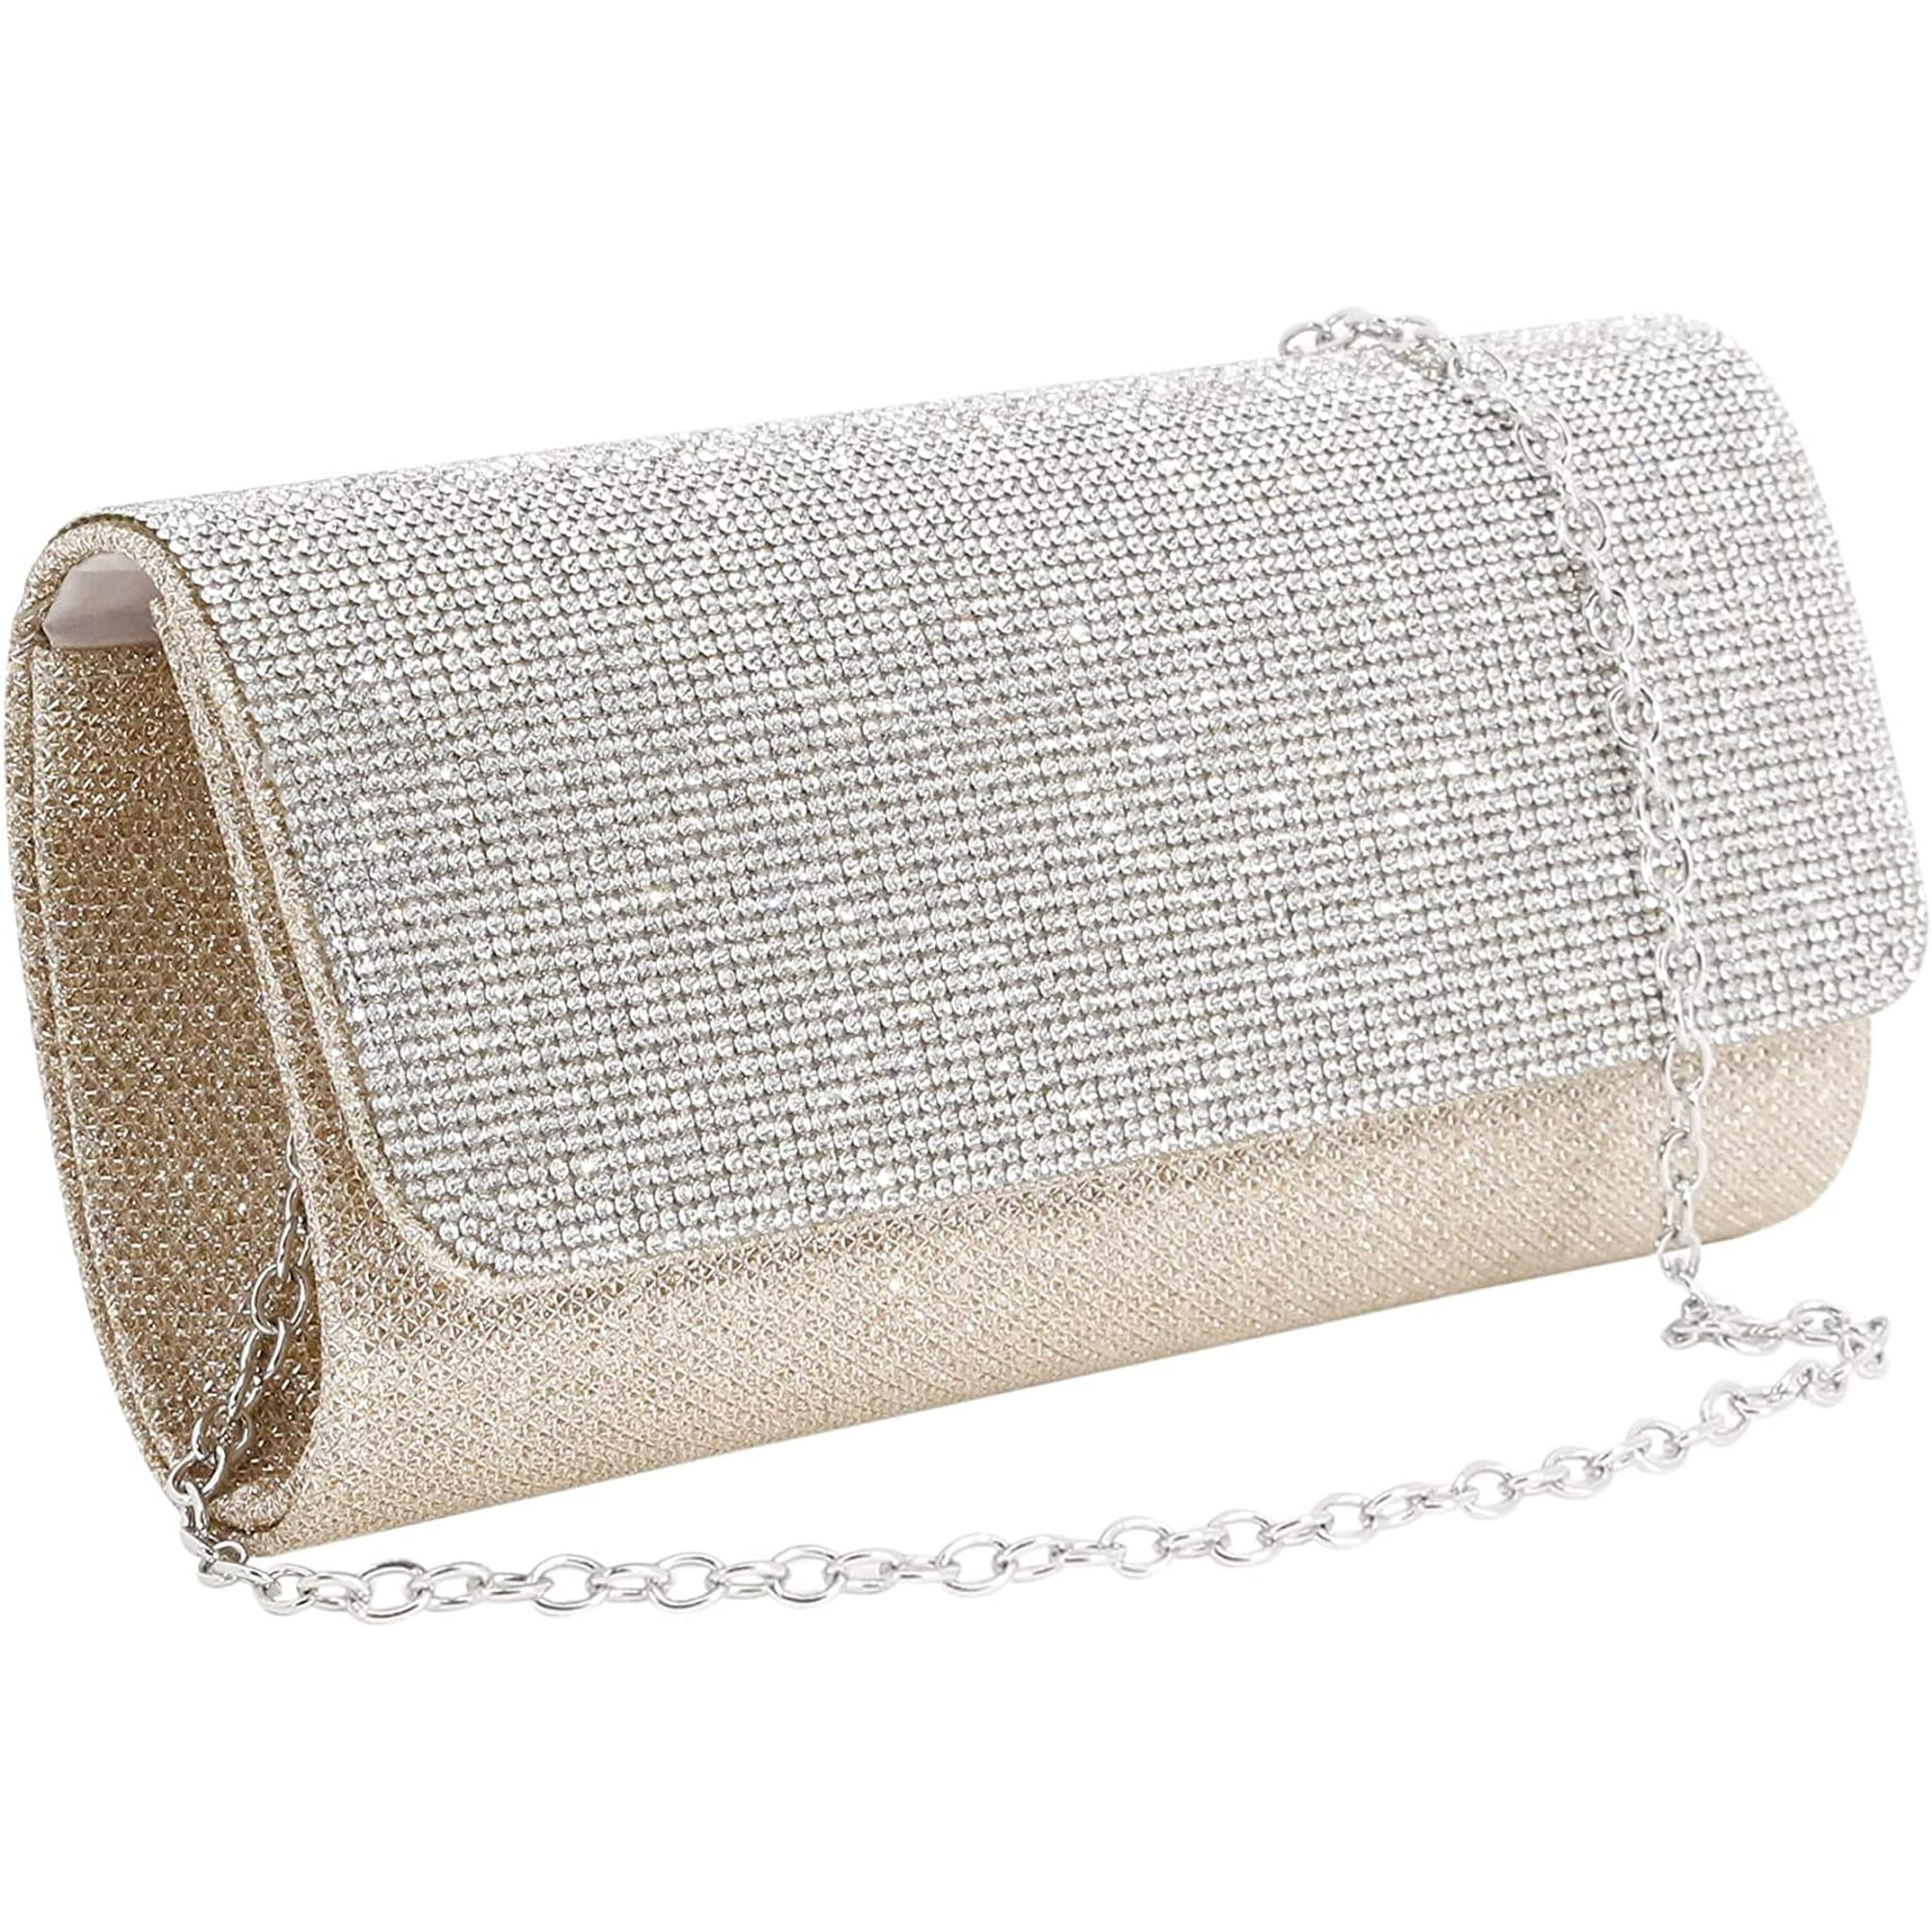 Naimo Flap Dazzling Small Clutch Bag Evening Bag With Detachable